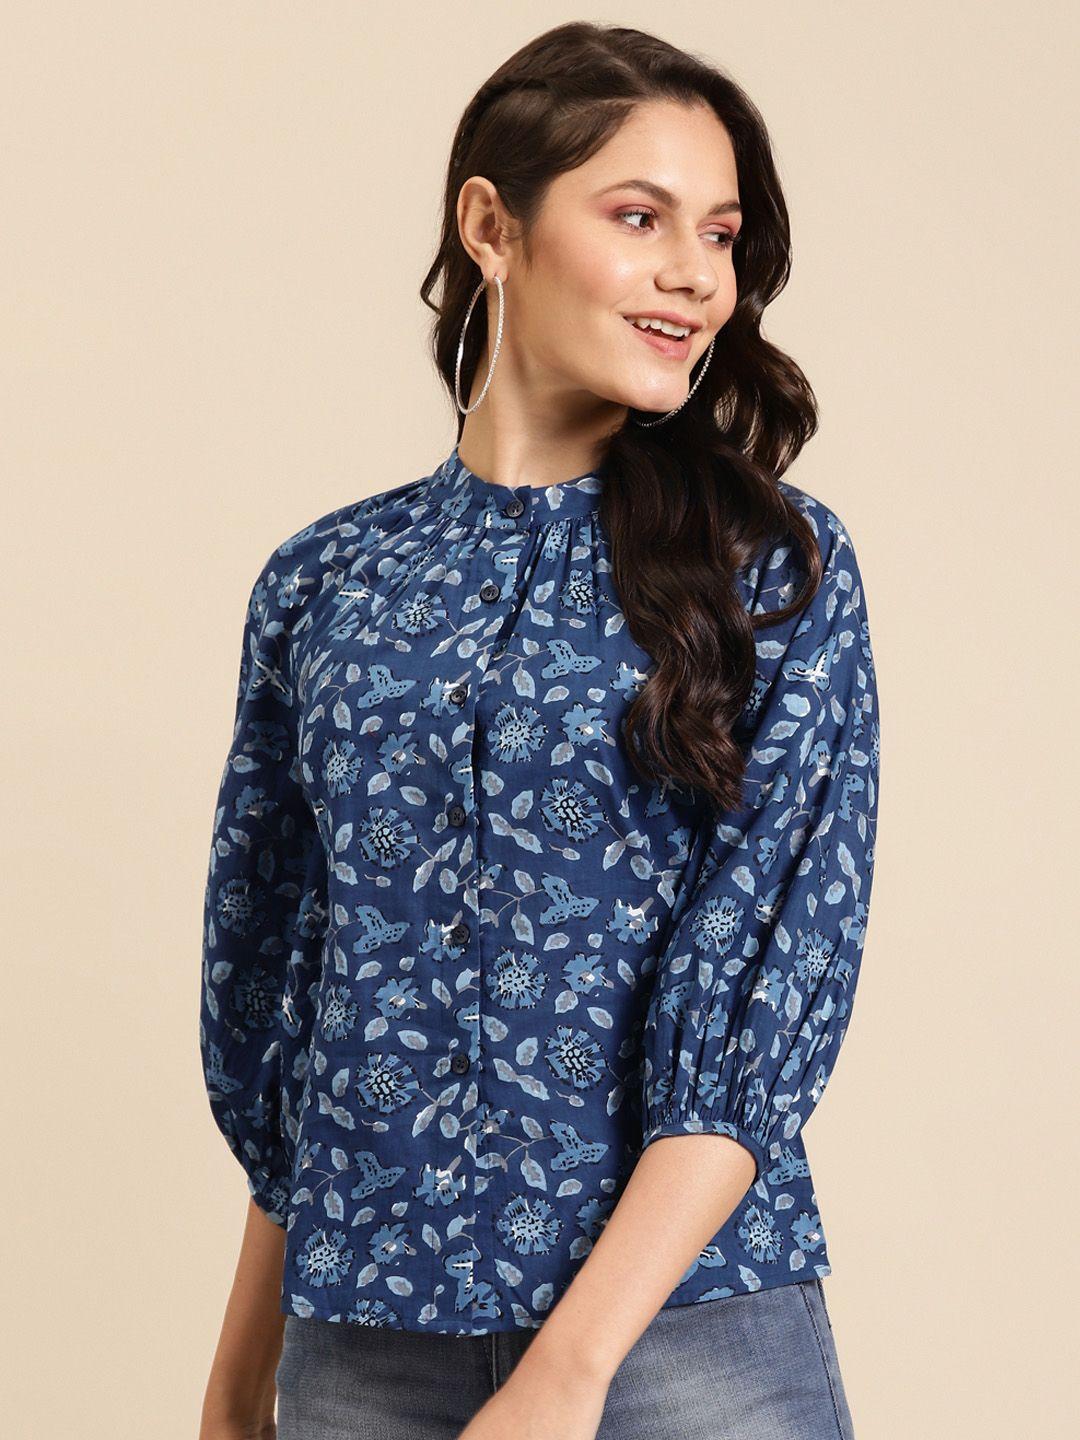 mabish by sonal jain navy blue floral print pure cotton puff sleeves shirt style top